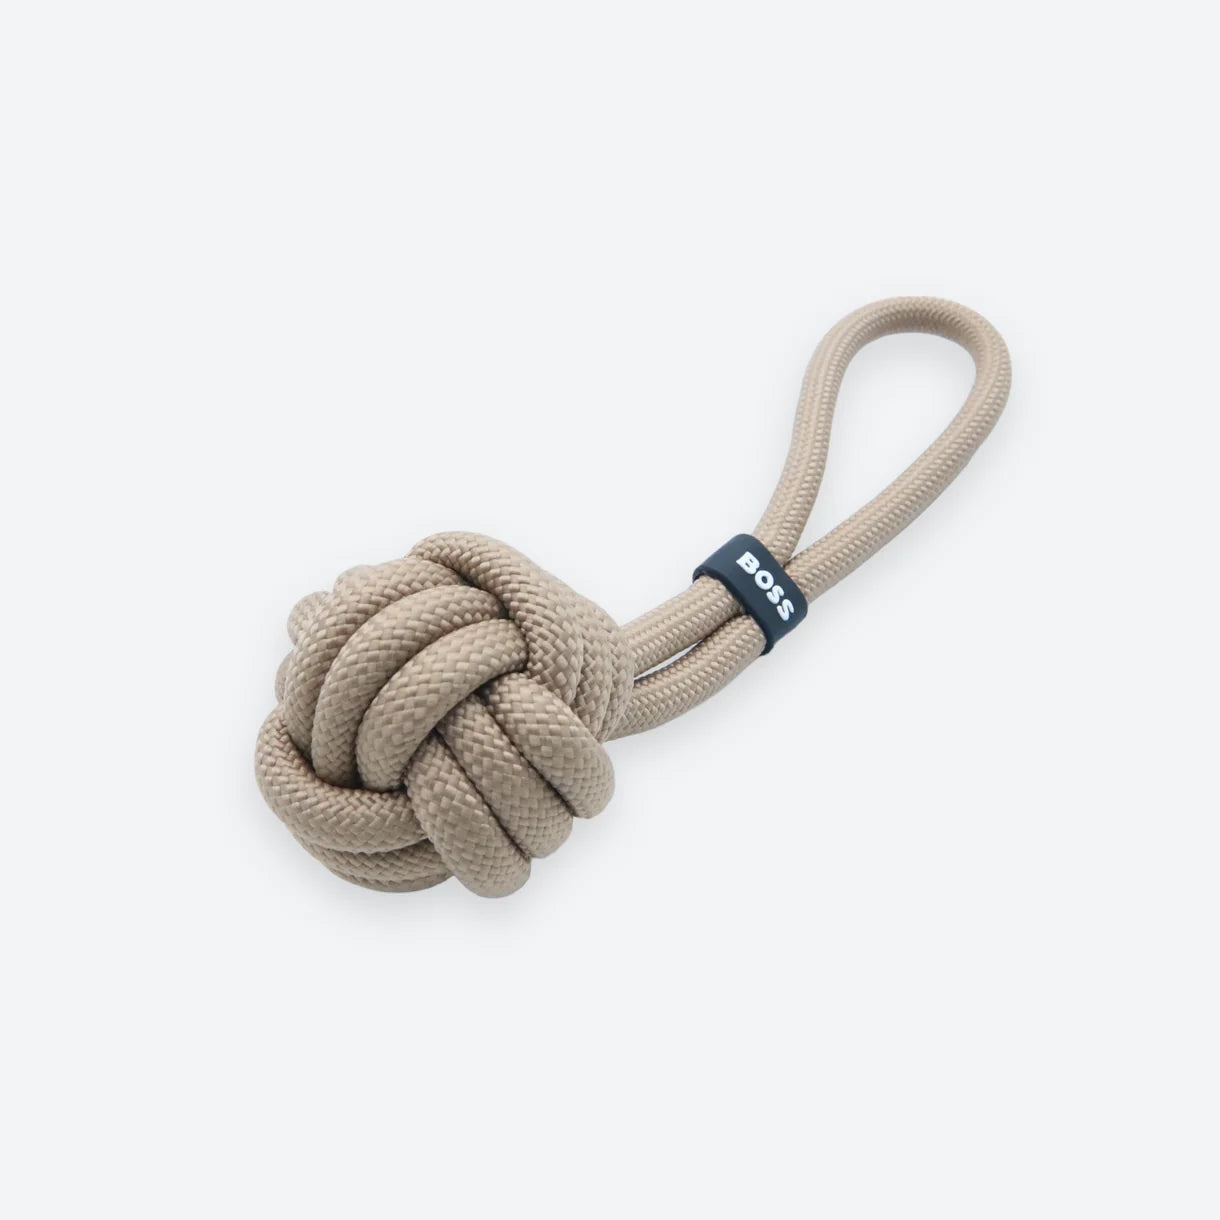 BOSS Rope Pull Toy